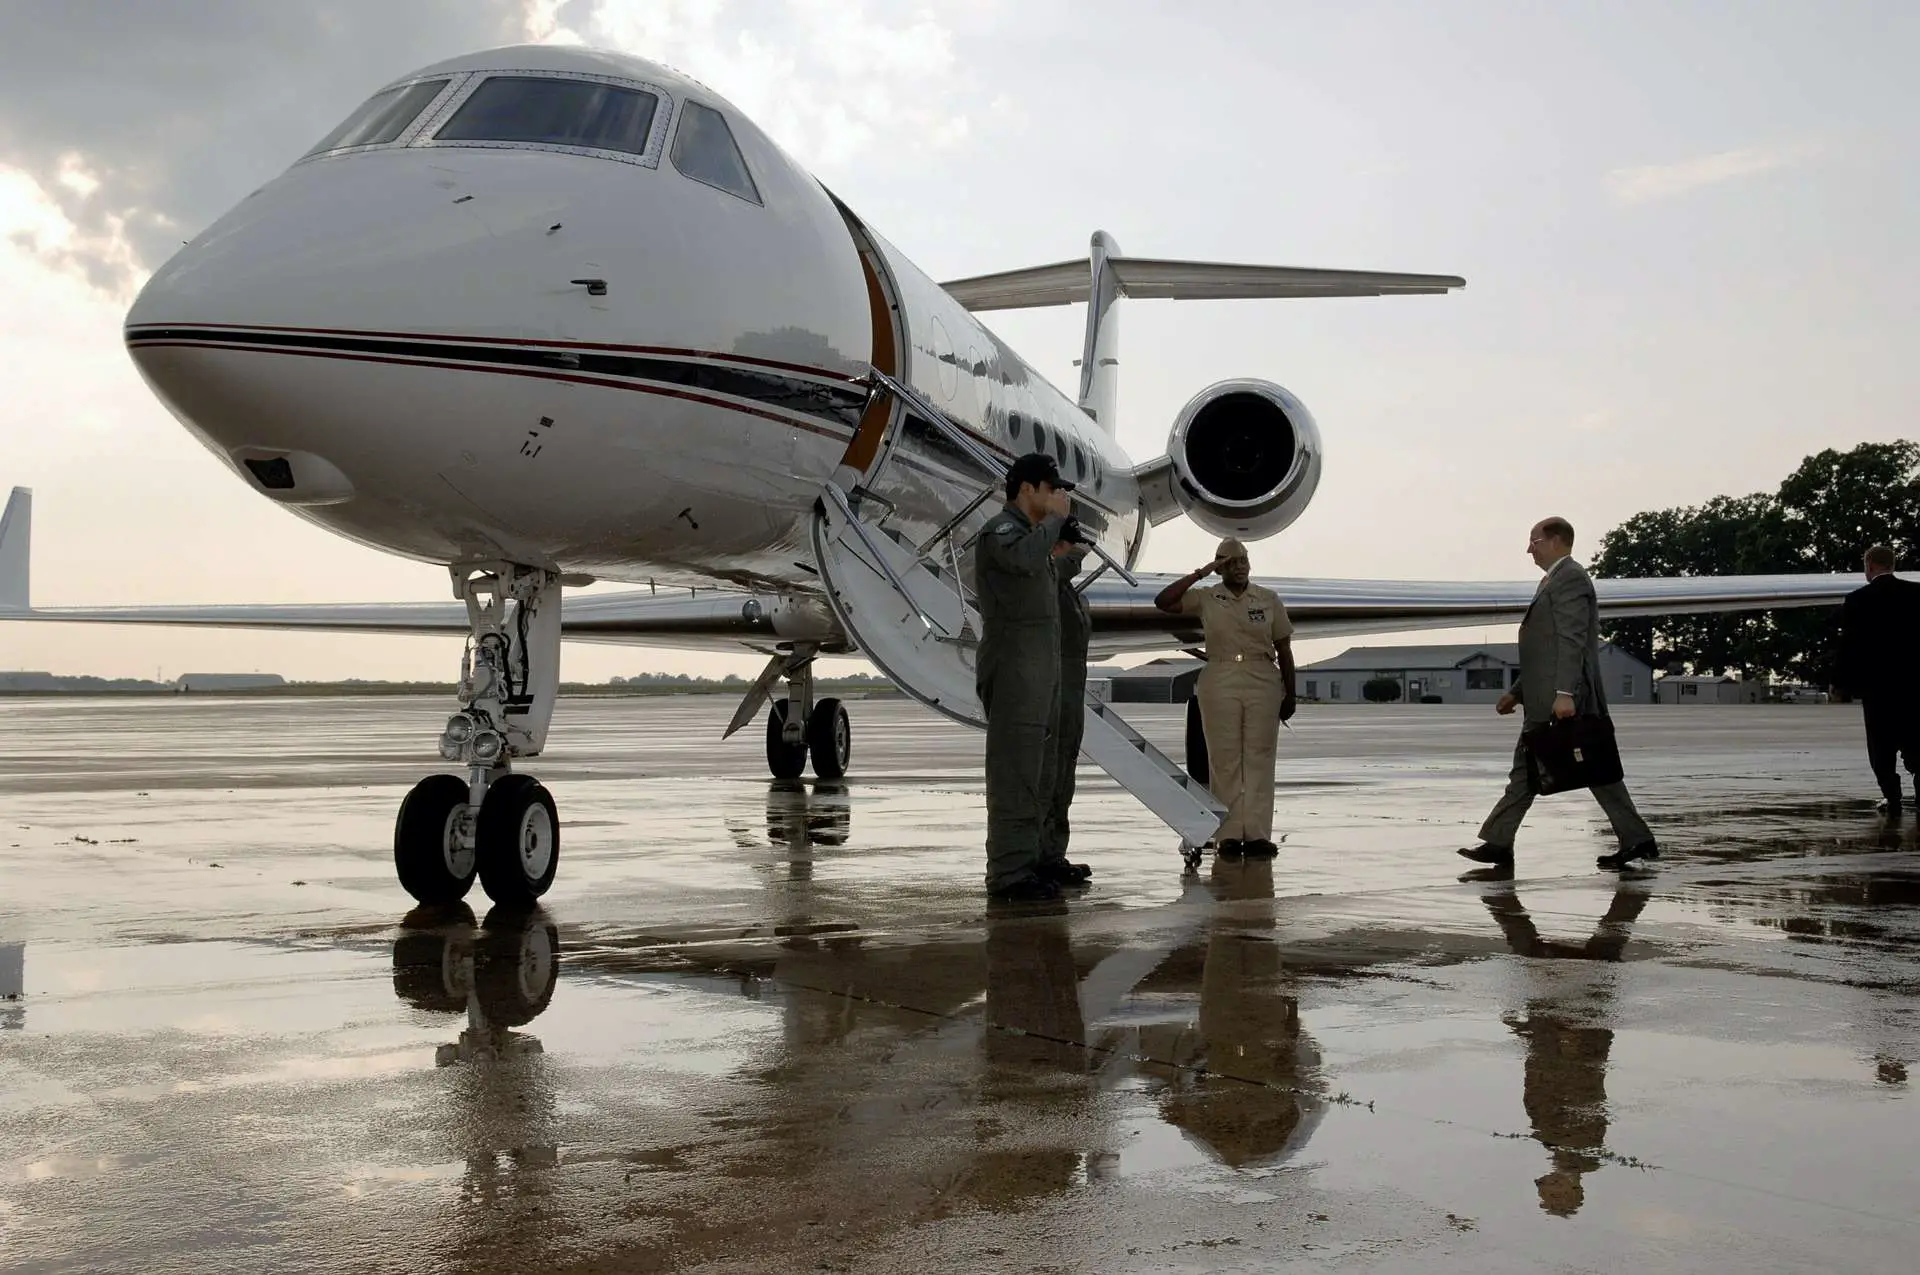 Business Aircraft | Travel Tips | Business Terminology - The Top 10 Workplace Wank Words That Make Us Want To Travel | Travel Tips | Author: Anthony Bianco - The Travel Tart Blog